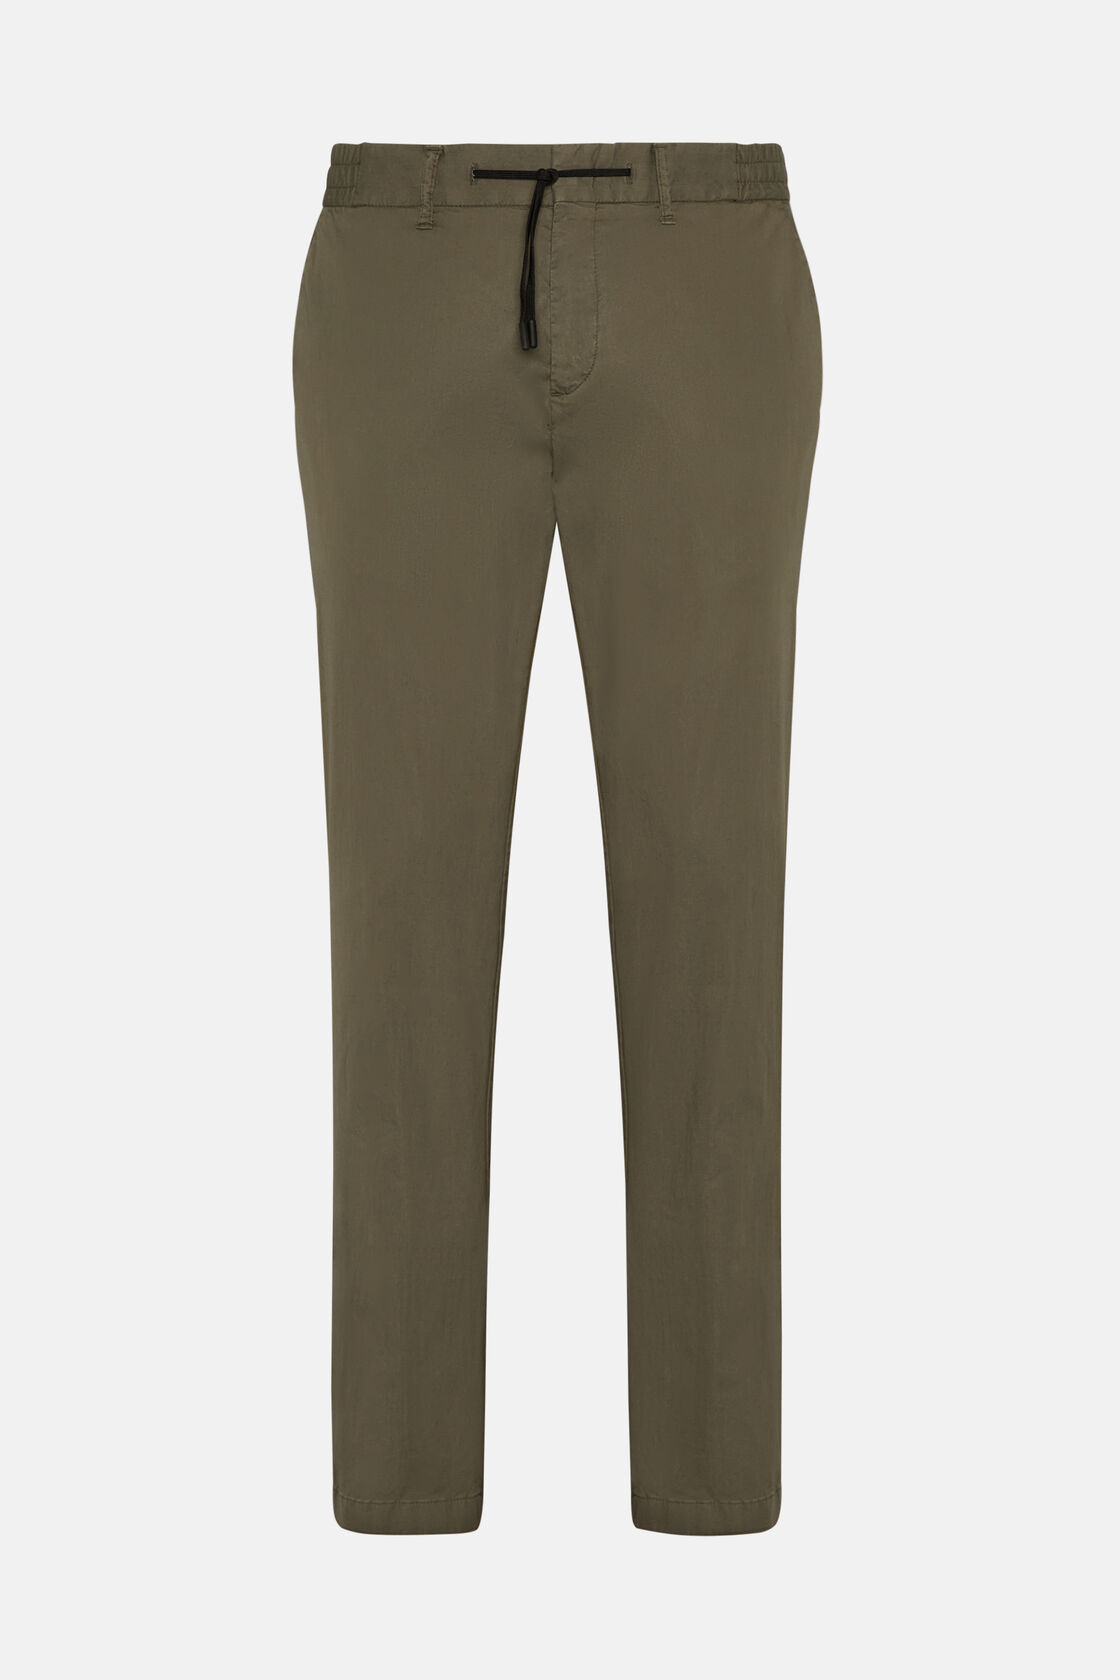 B Tech Stretch Cotton and Nylon Trousers, Military Green, hi-res